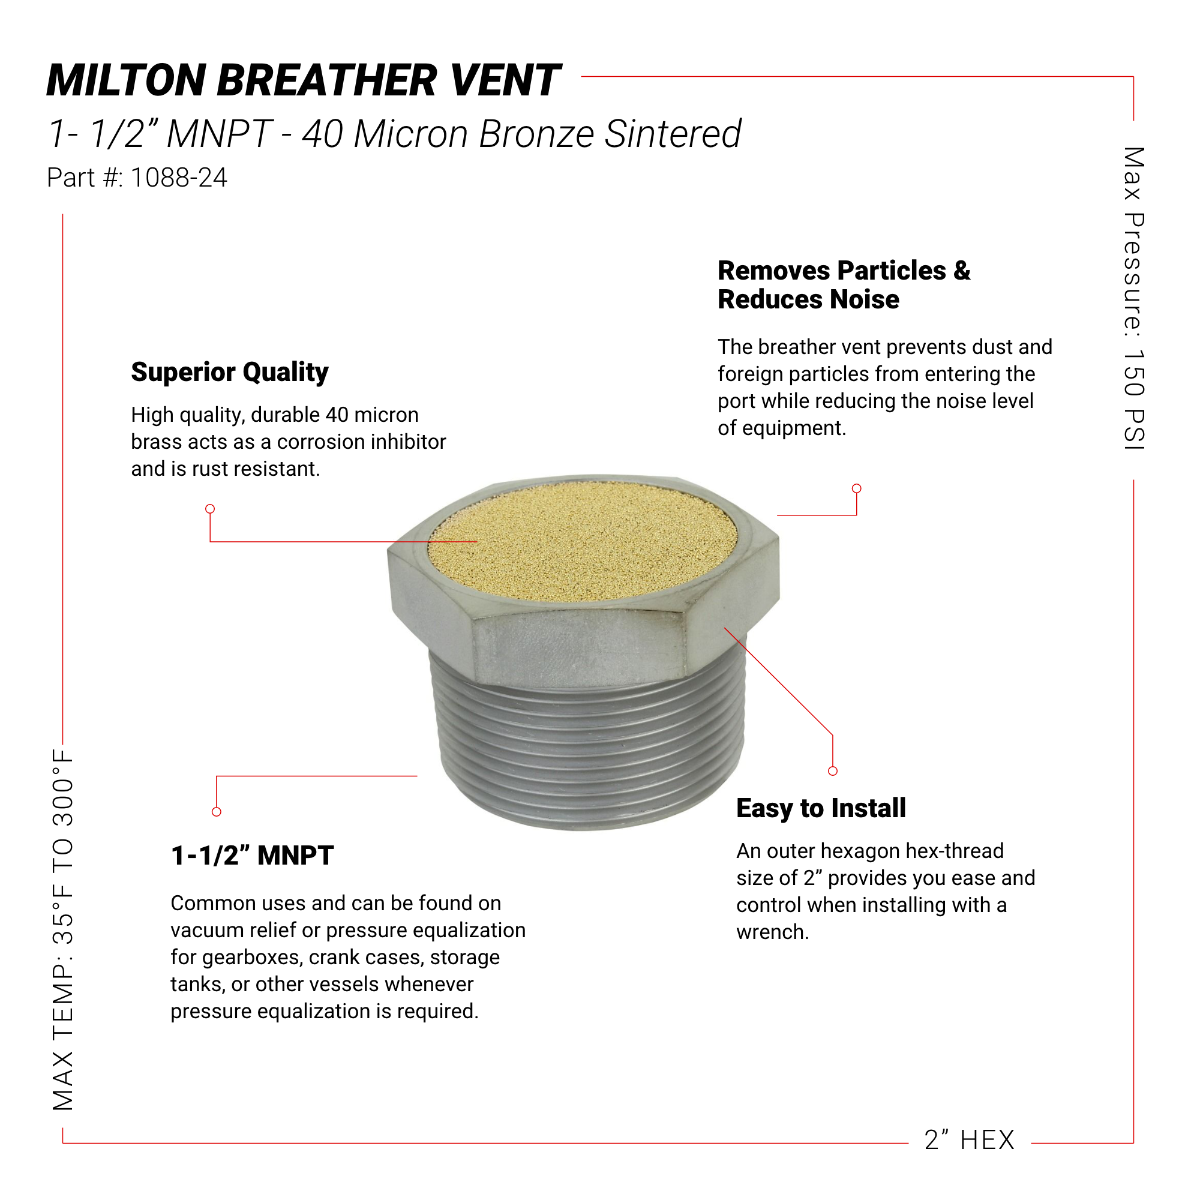 Breather Vent Pneumatic Muffler, 1- 1/2” MNPT - 40 Micron Sintered Bronze Silencer/Diffuse Air & Noise Reducer